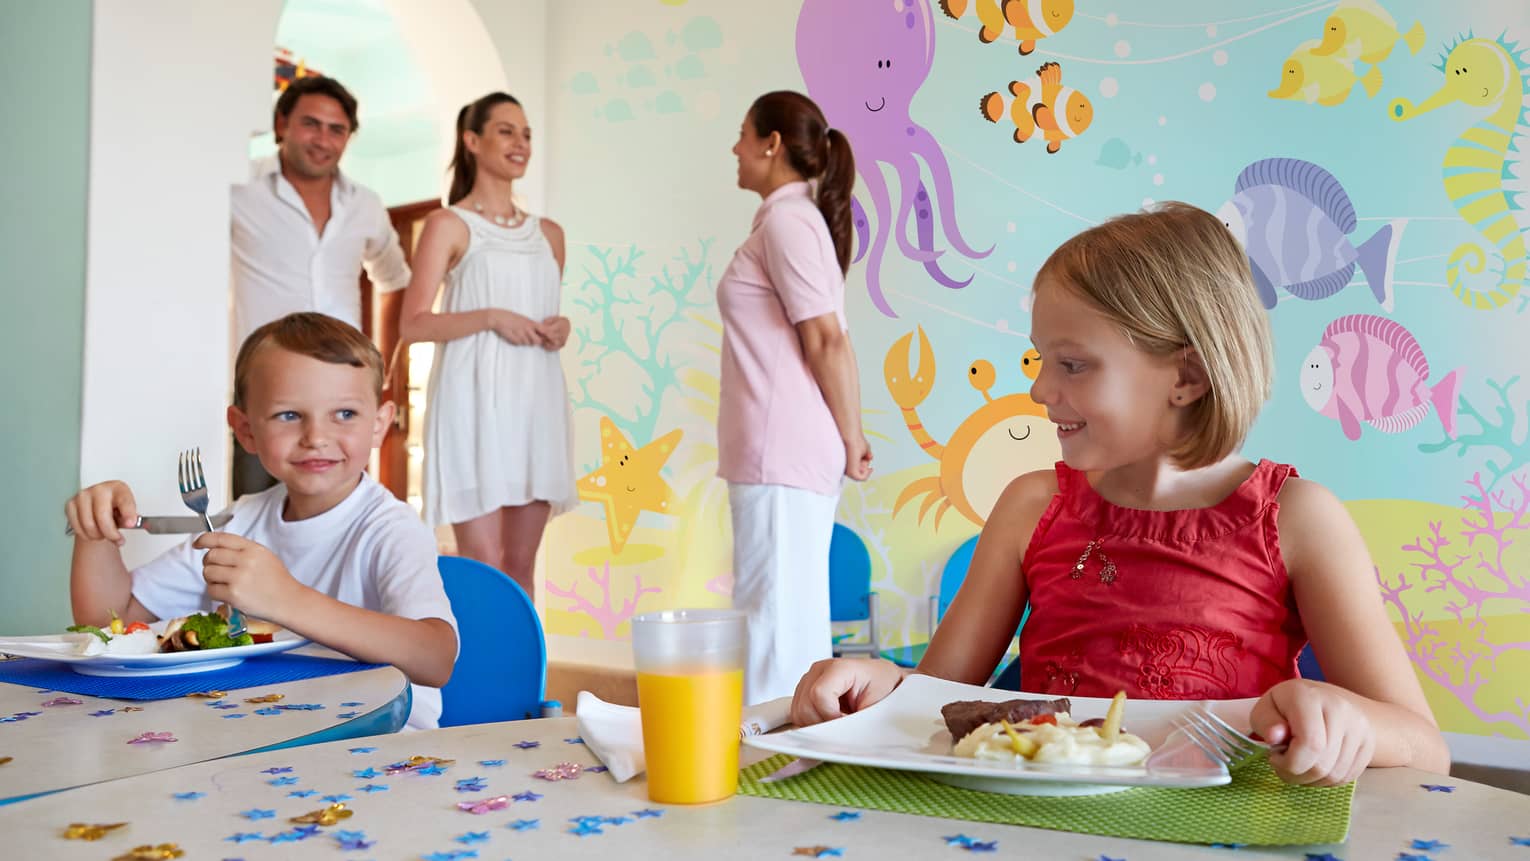 Two smiling young children at table with plates of lunch, glass of orange juice, parents and staff in front of colourful sea mural